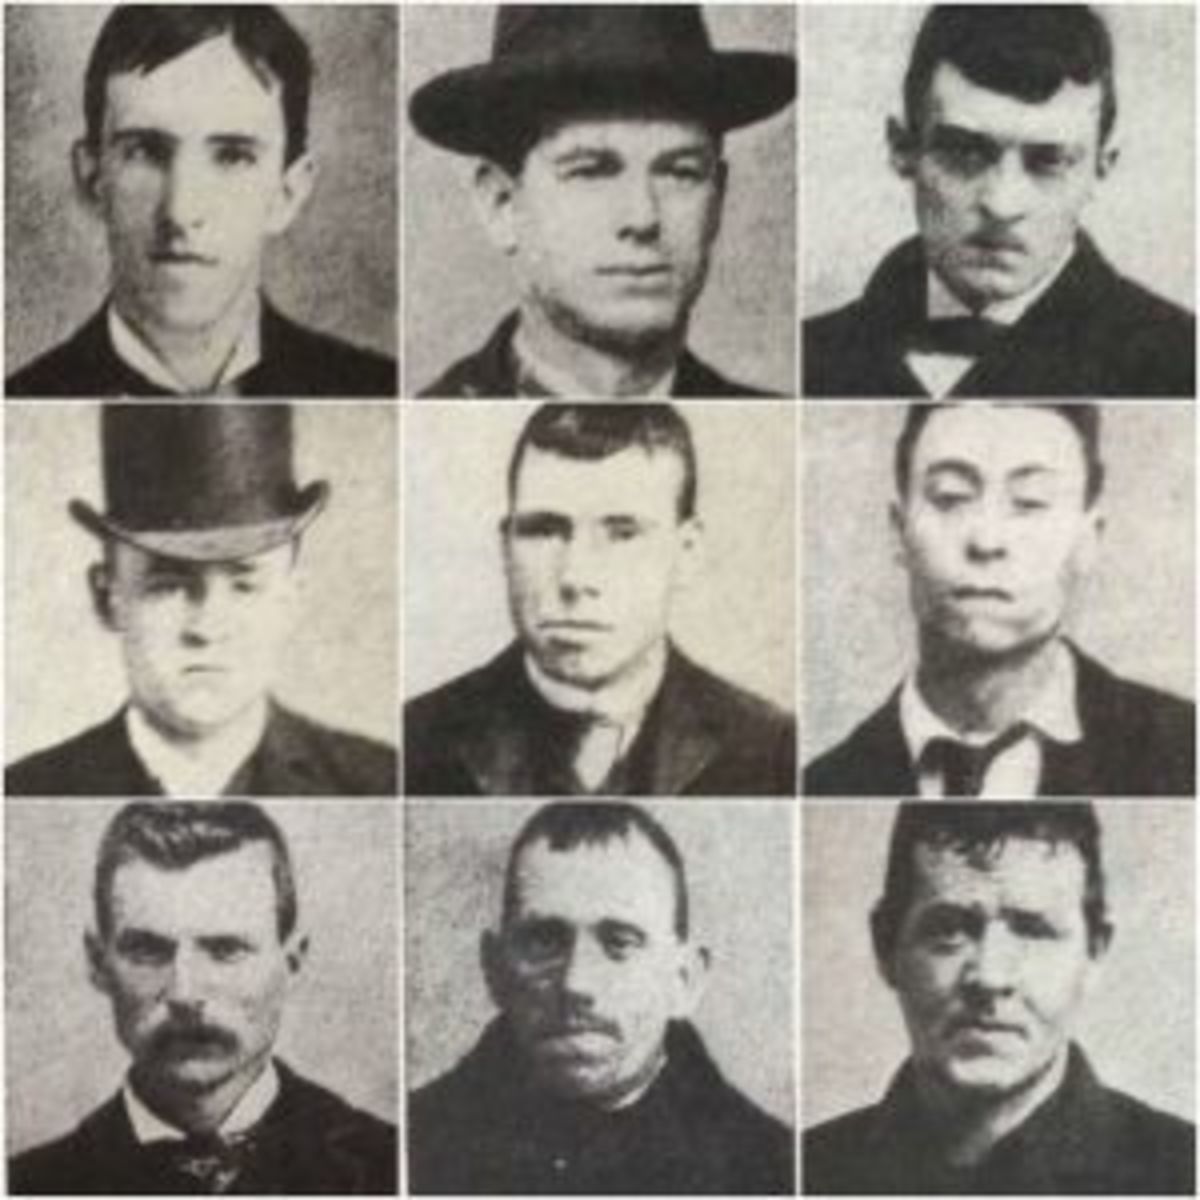 A rogue’s gallery of Whyo gangsters. Top row (left to right) Baboon Connolly, Josh Hines, Bull Hurley. Middle row: Clops Connolly, Dorsey Doyle, Googy Corcoran. Bottom row: Mike Lloyd, Piker Ryan, Red Rocks Farrell.